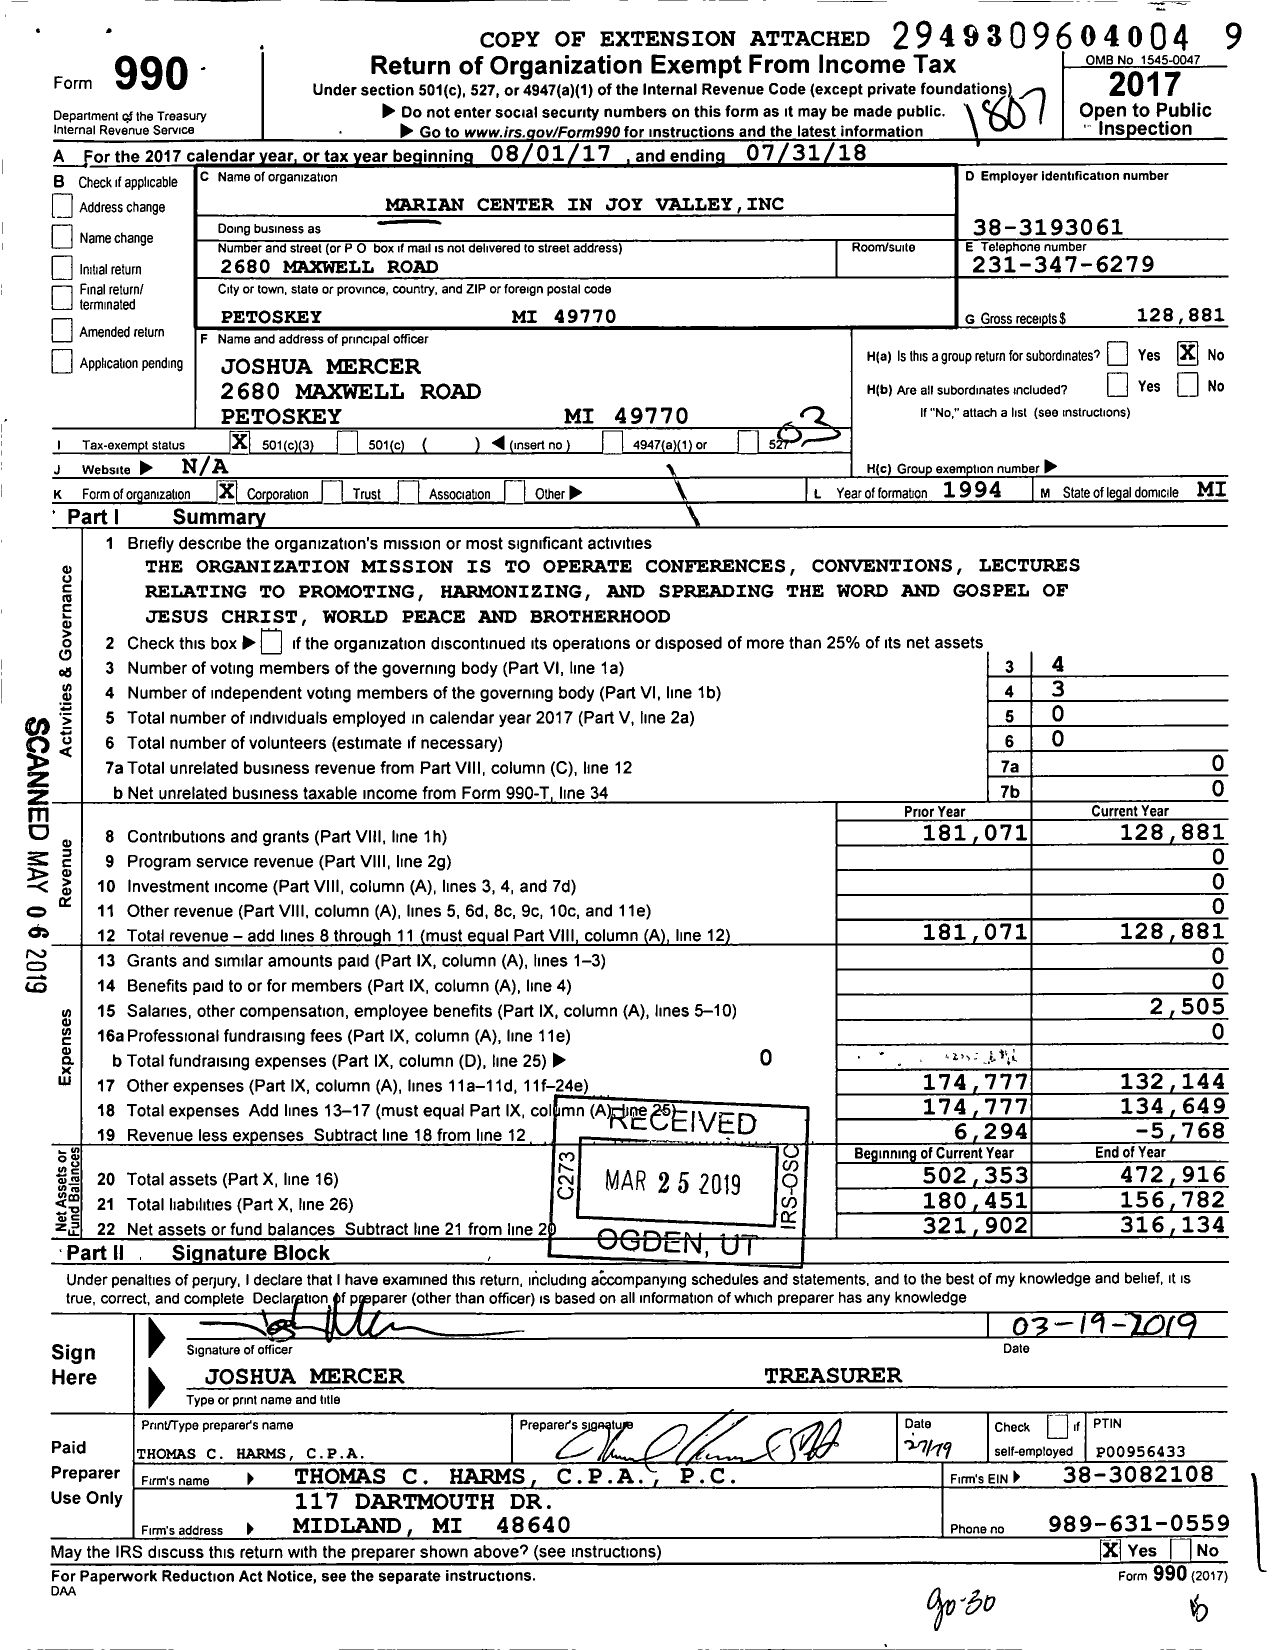 Image of first page of 2017 Form 990 for Marian Center in Joy Valley